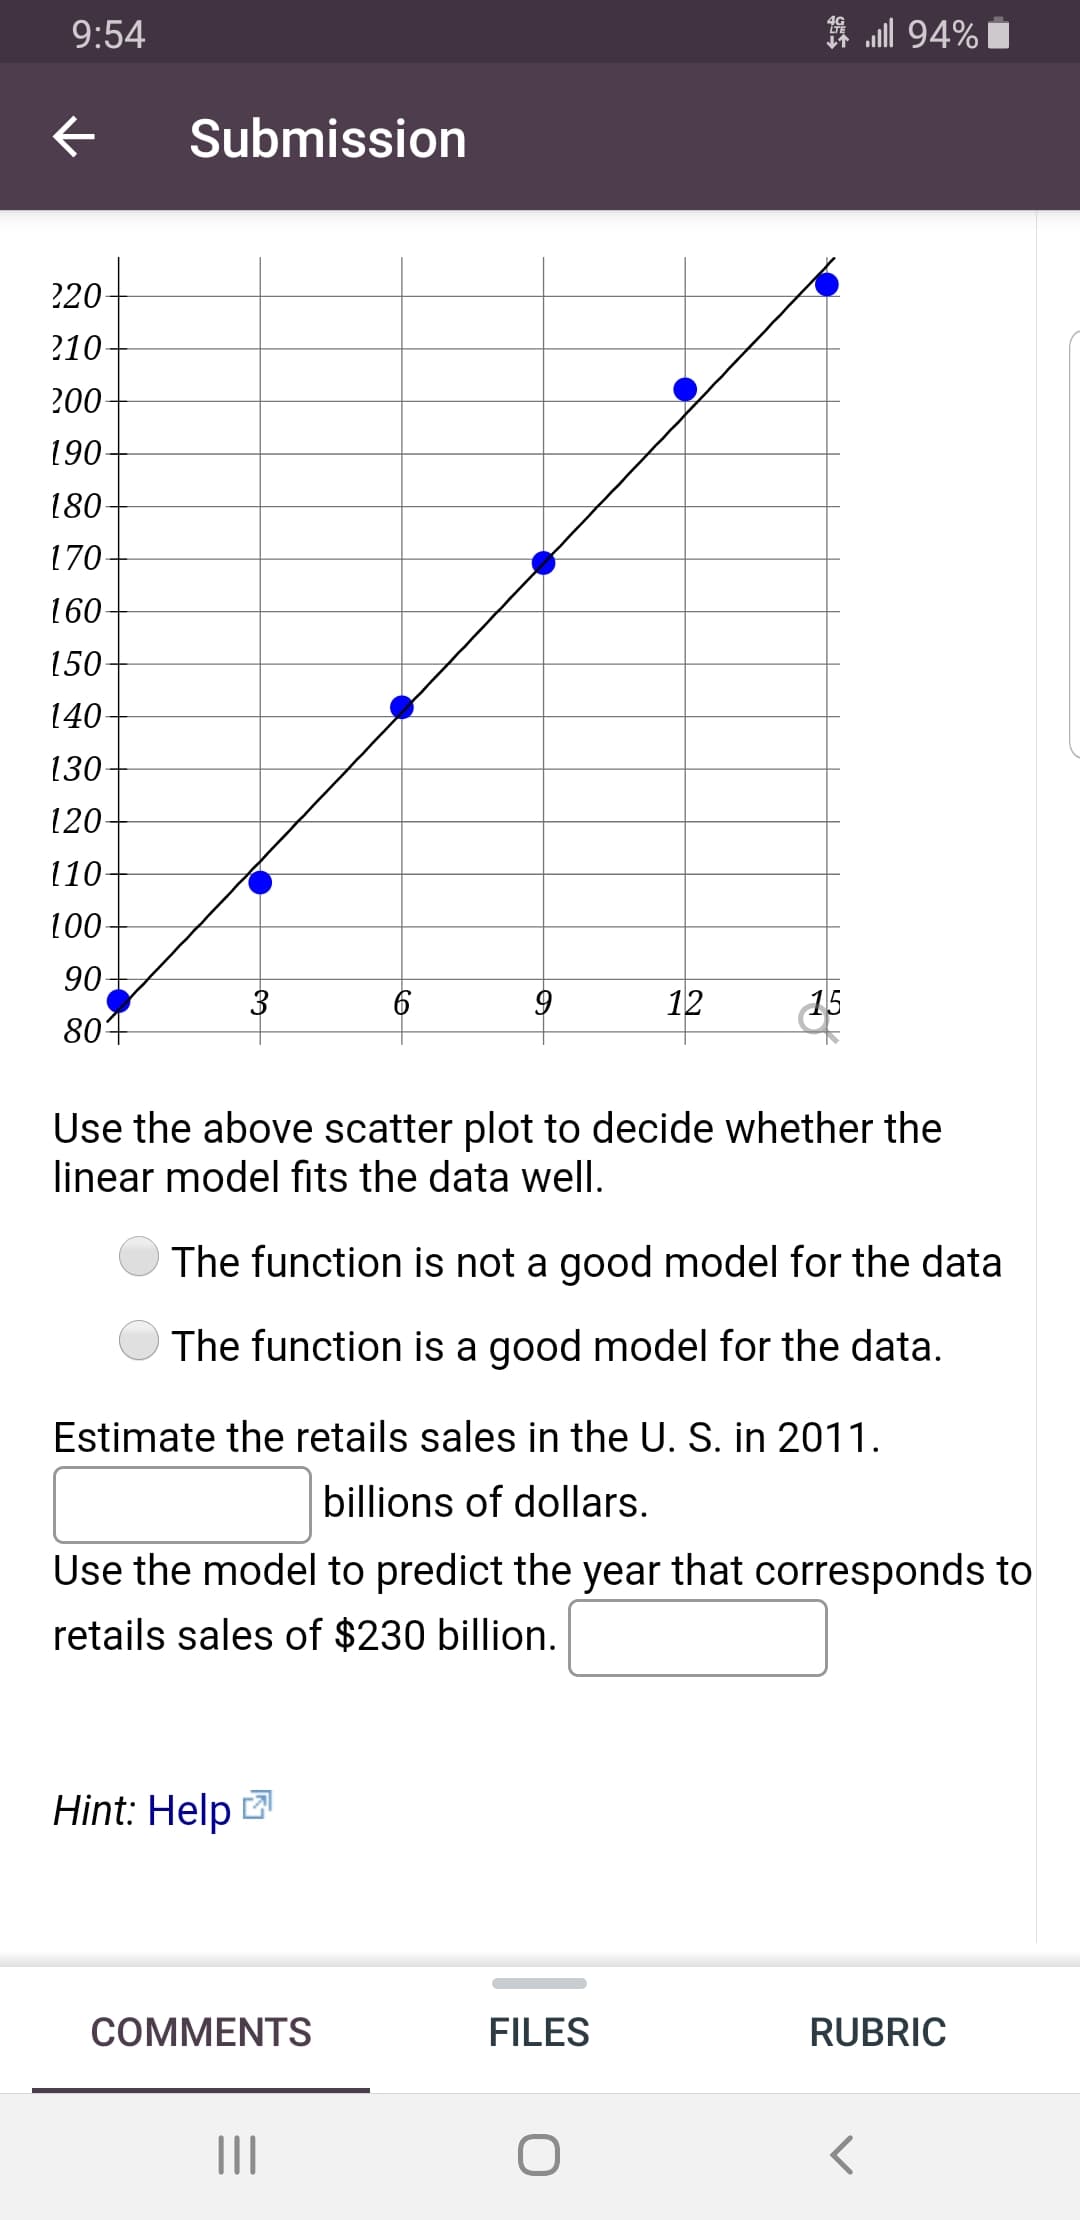 220
210-
200
190
180-
170
160
150
140-
130
120-
110-
100
90
12
15
804
Use the above scatter plot to decide whether the
linear model fits the data well.
The function is not a good model for the data
The function is a good model for the data.
Estimate the retails sales in the U. S. in 2011.
billions of dollars.
Use the model to predict the year that corresponds to
retails sales of $230 billion.
